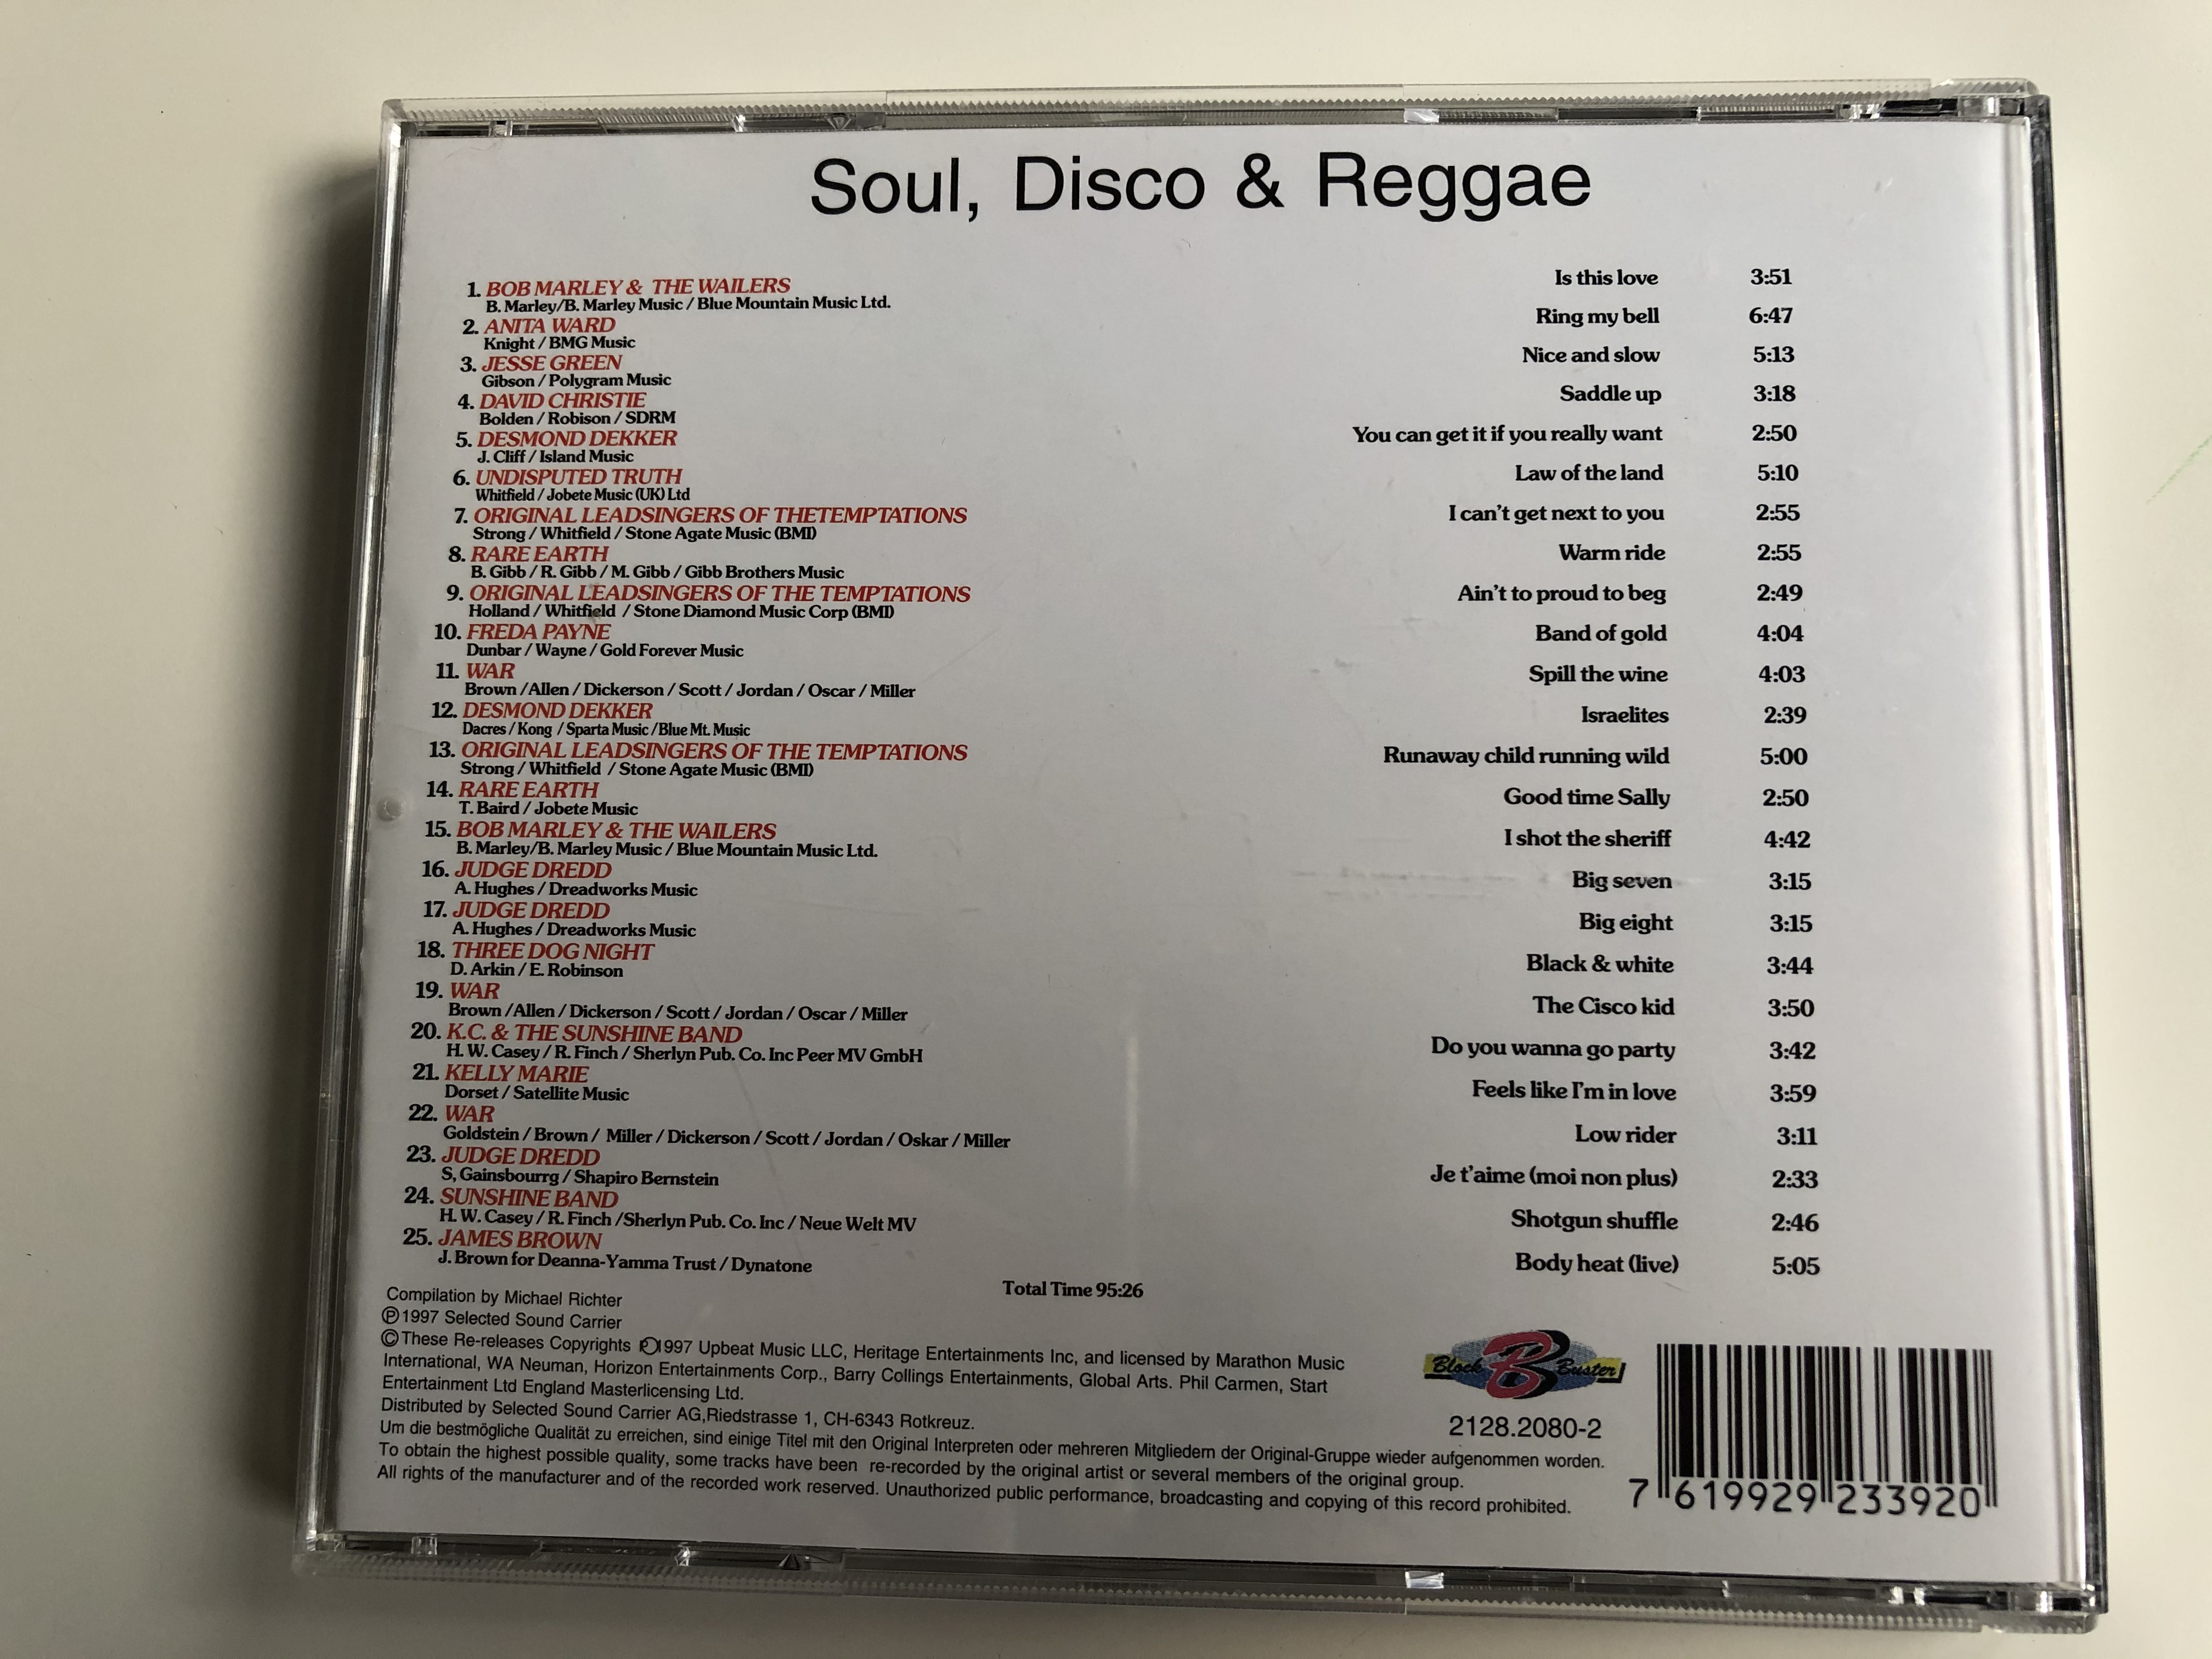 soul-disco-reggae-bob-marley-is-this-love-anita-ward-ring-my-bell-jesse-green-nice-and-slow-david-christie-saddle-up-desmond-dekker-you-can-get-it-if-you-really-want-selected-3-.jpg